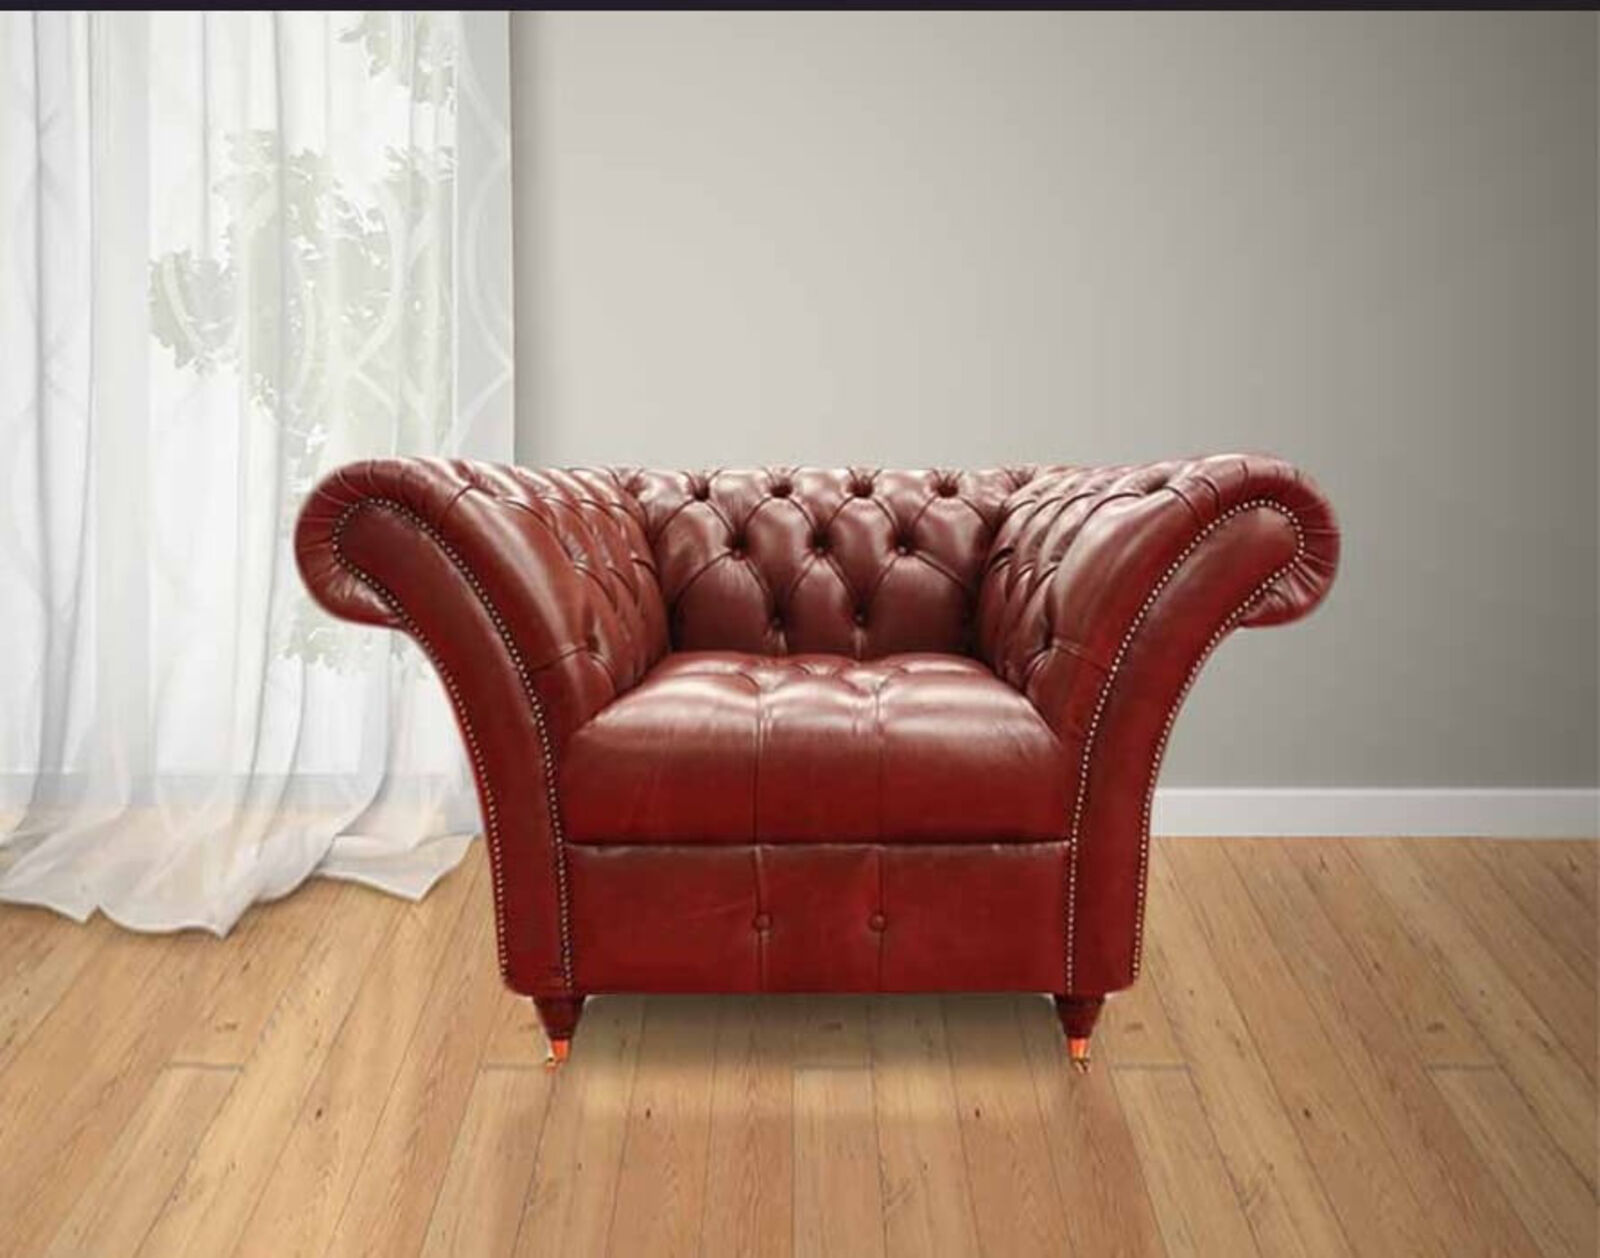 Product photograph of The Graduate Chesterfield Buttoned Base Vintage Leather Armchair Old English Aniline Chestnut Leather from Designer Sofas 4U